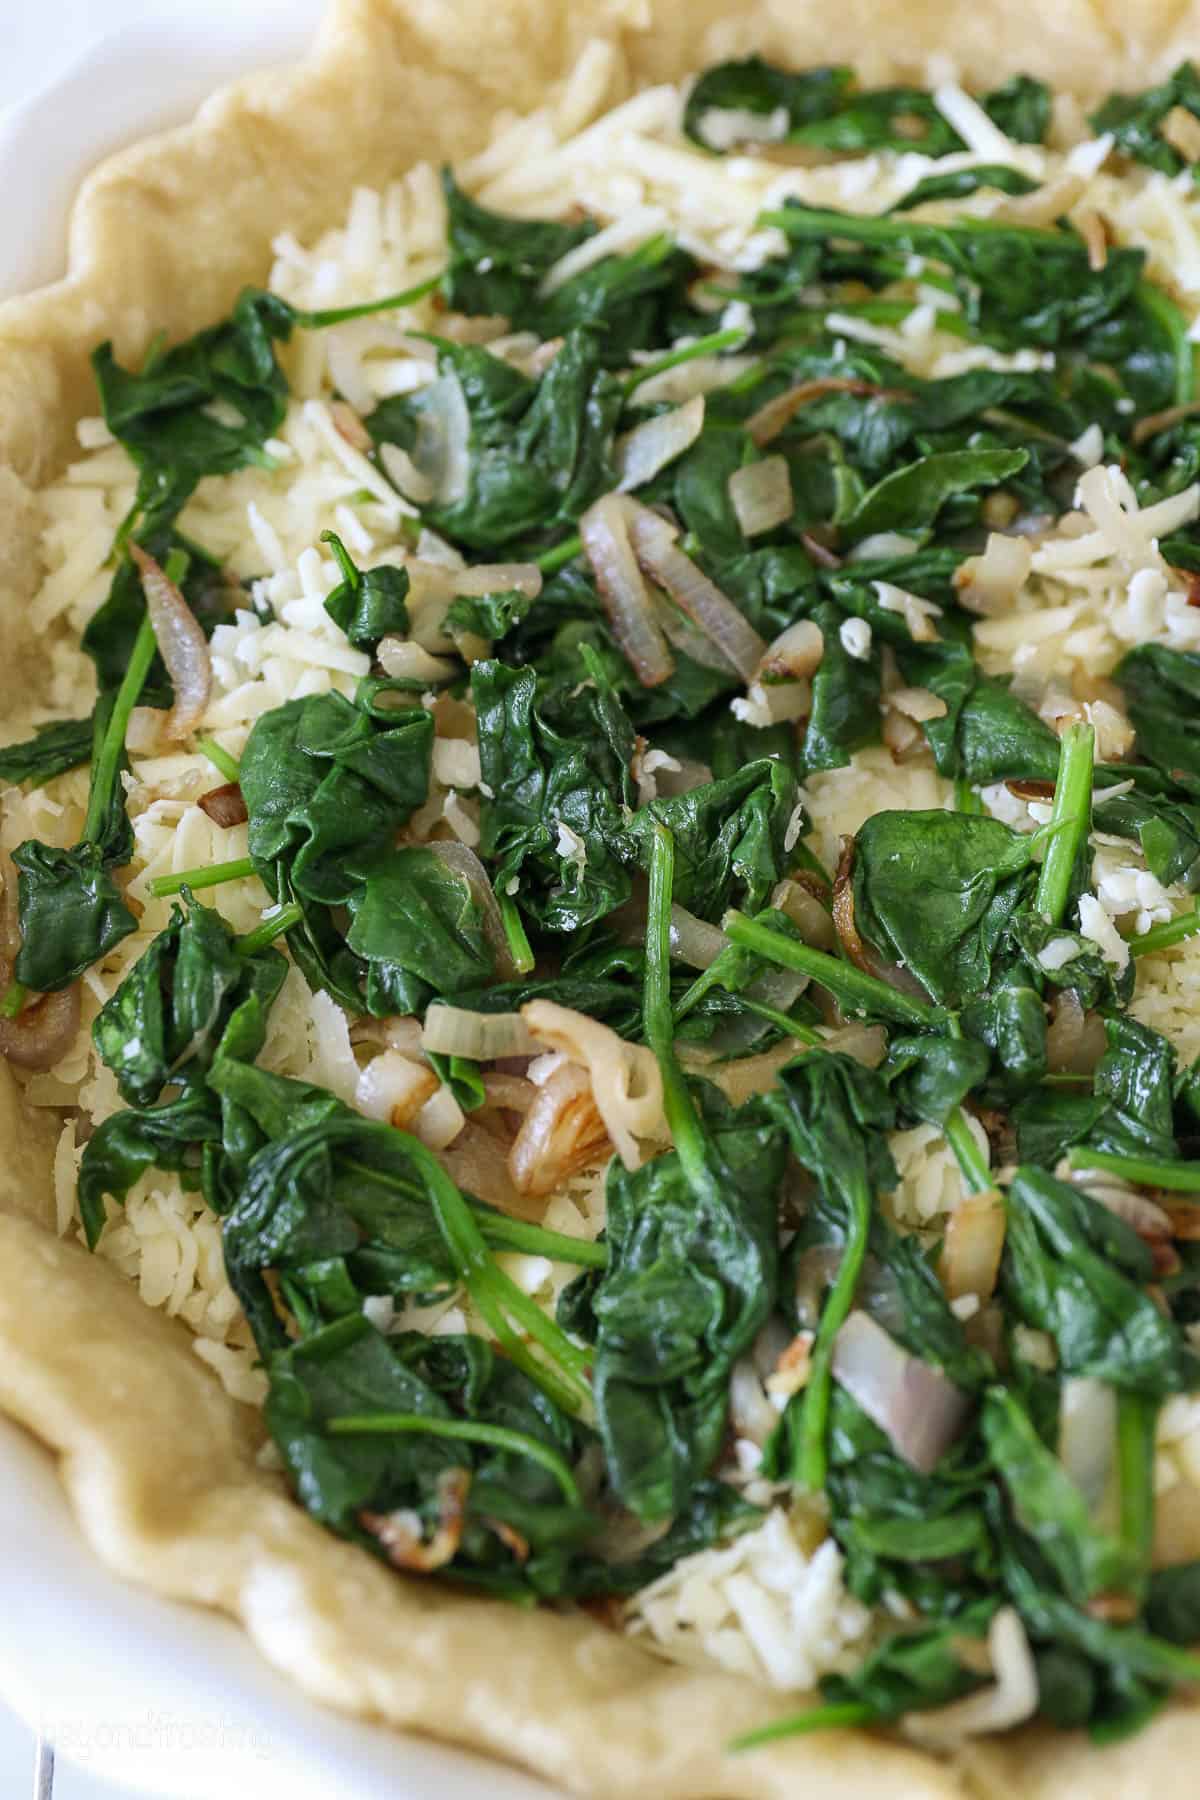 Shredded cheese topped with spinach in a pie crust